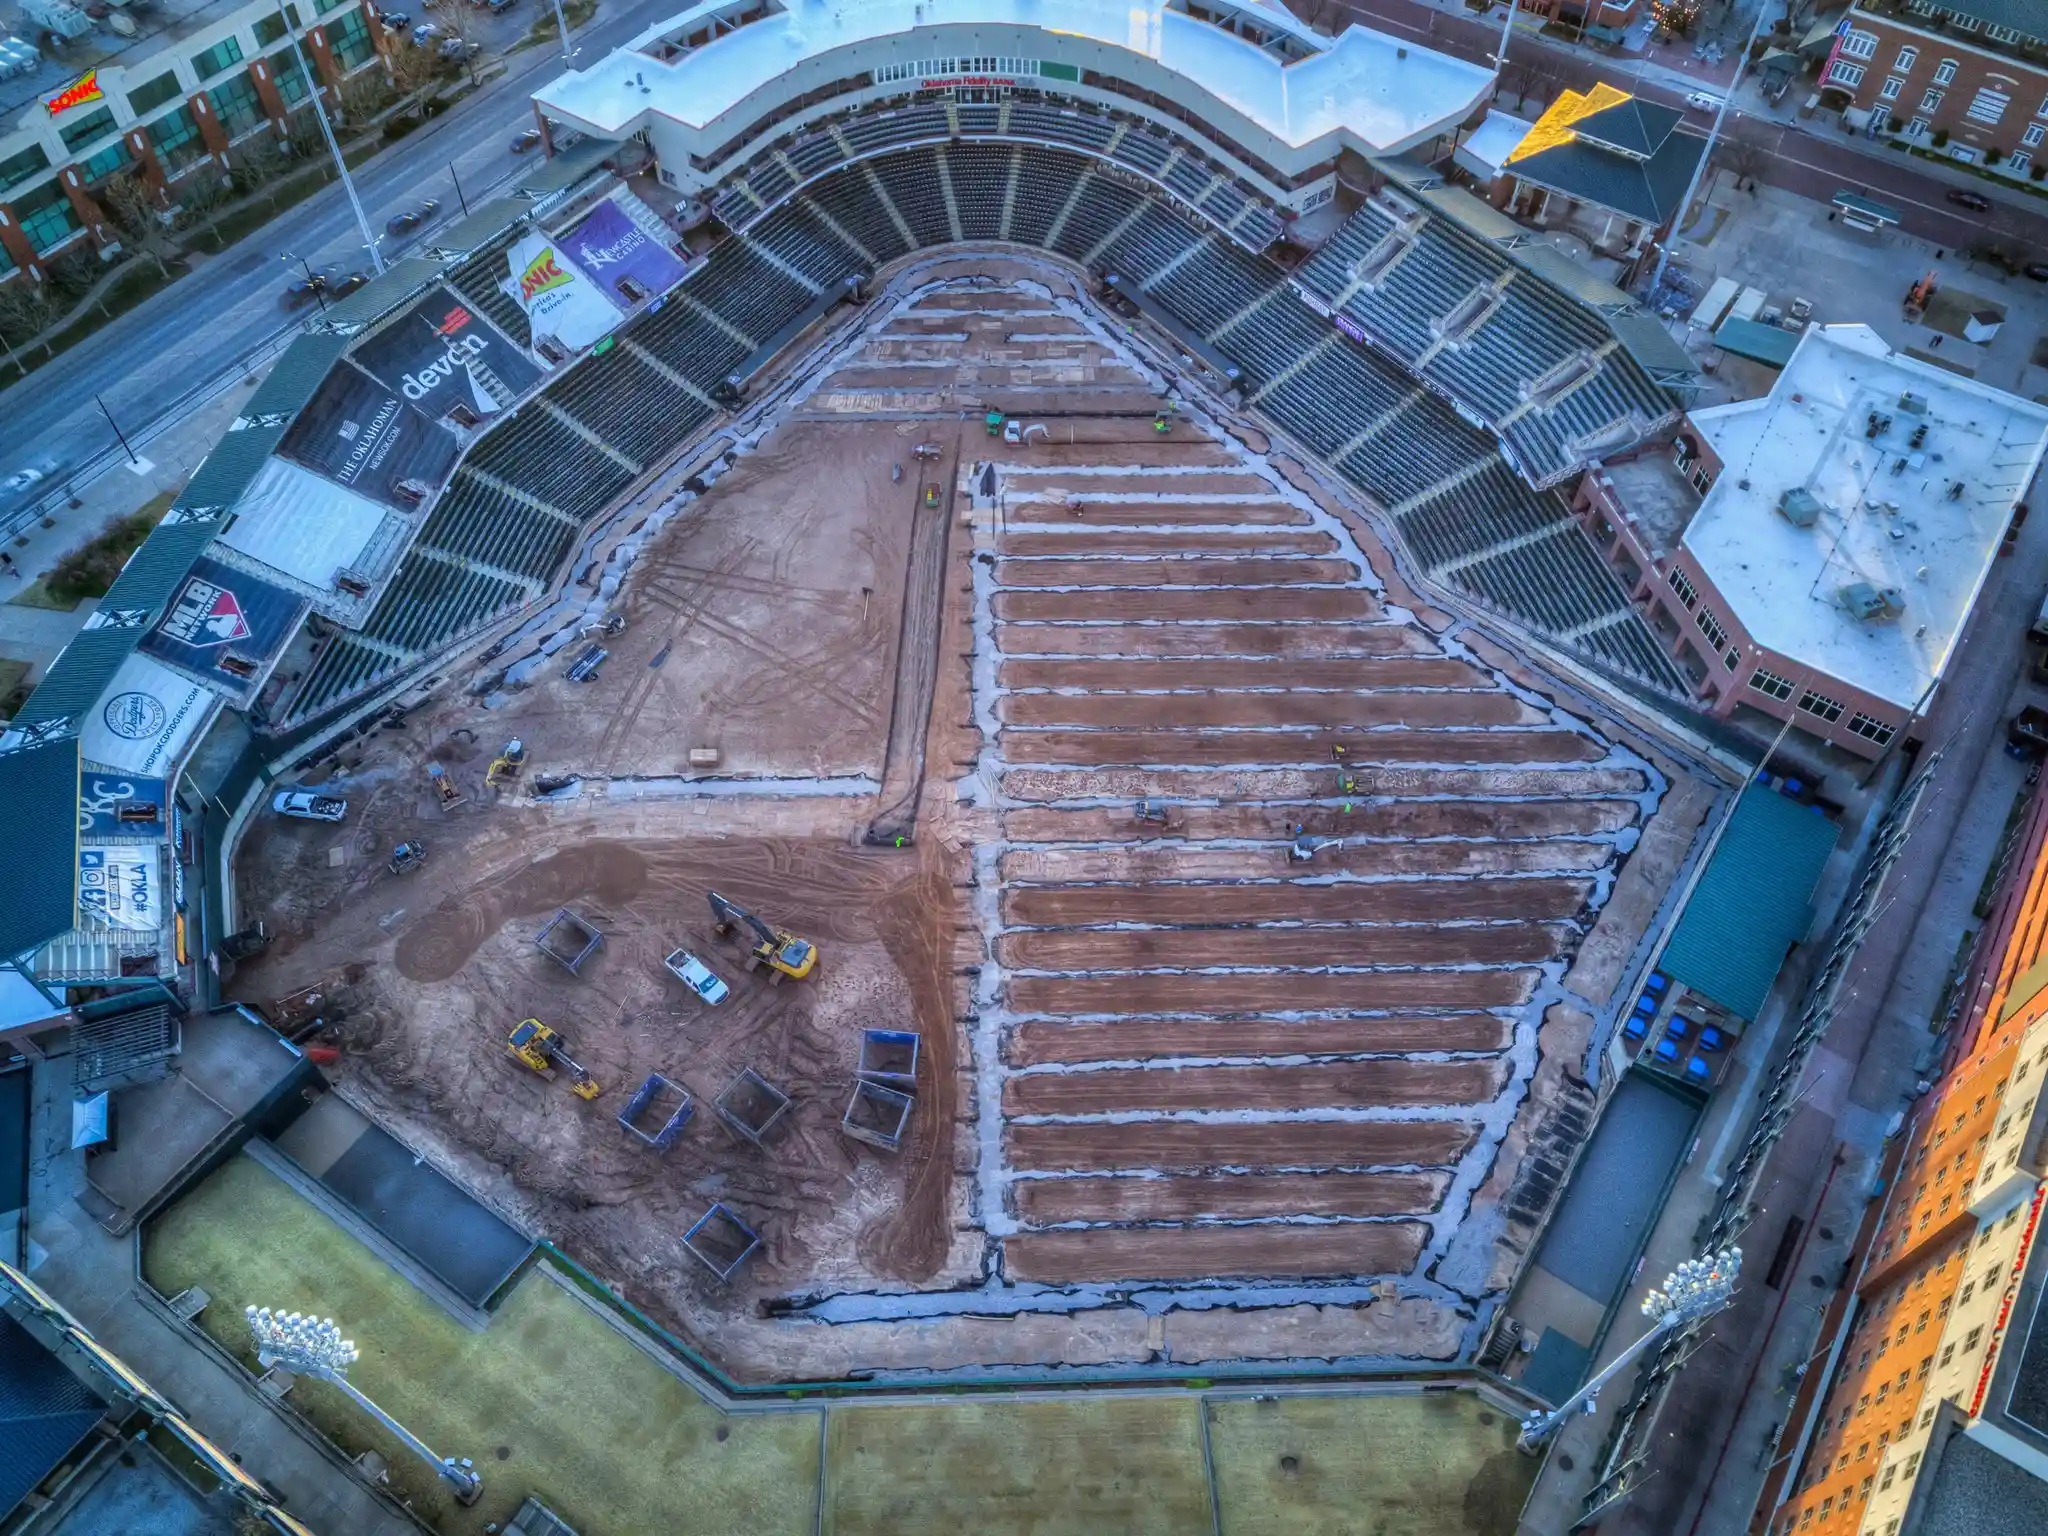 An aerial view of a baseball field under construction.